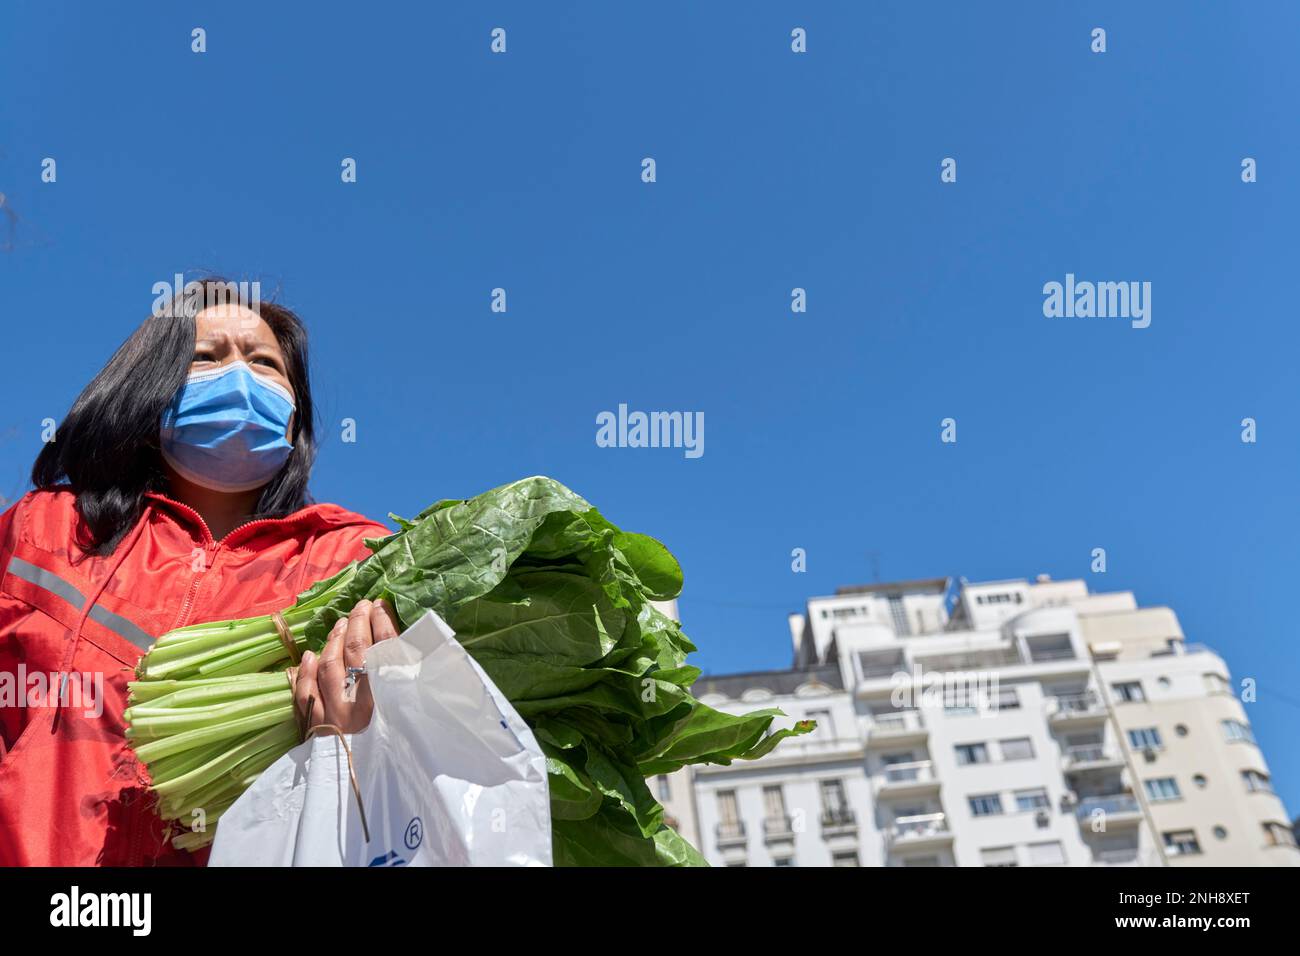 Buenos Aires, Argentina, 21 sept, 2021: UTT, Union de Trabajadores de la Tierra, Land Workers Union, gave away free organic food, fruits and vegetable Stock Photo